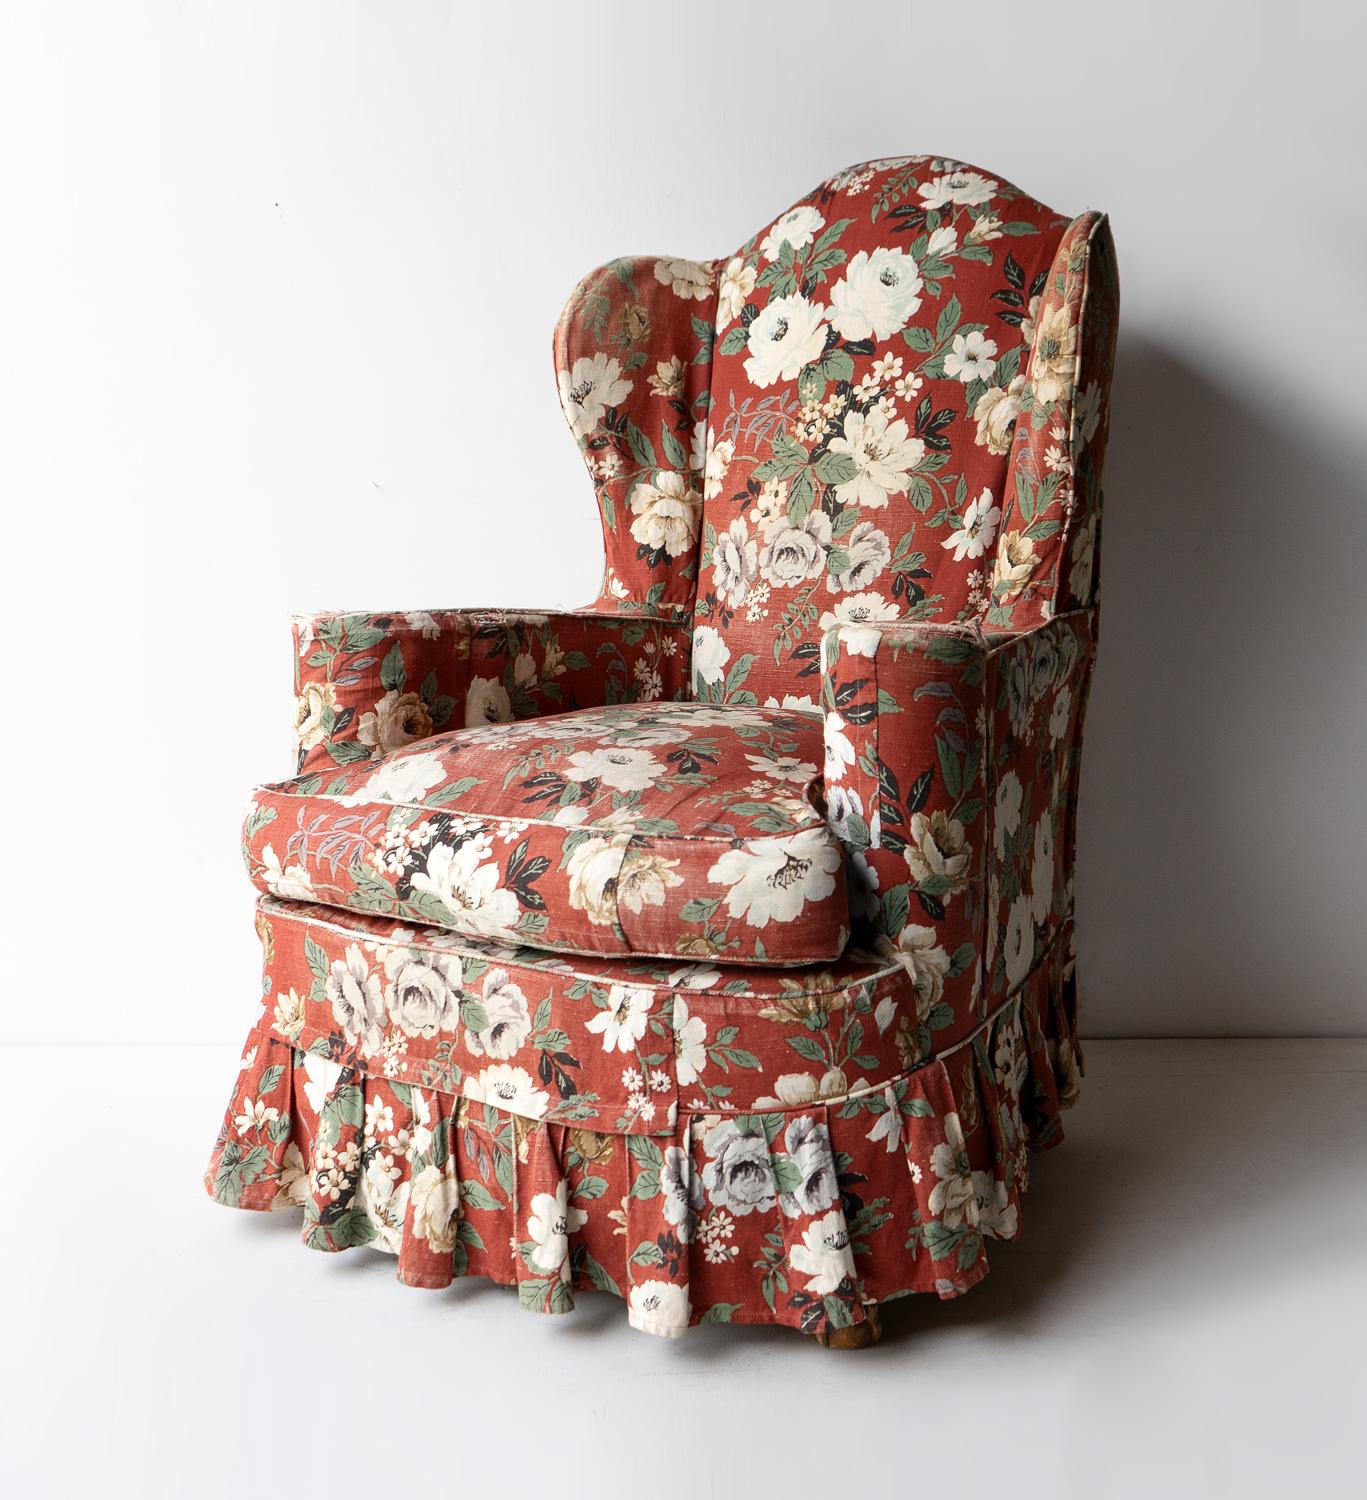 Hand-Crafted Vintage Floral Loose Cover Upholstered Country House Armchair, 1940s